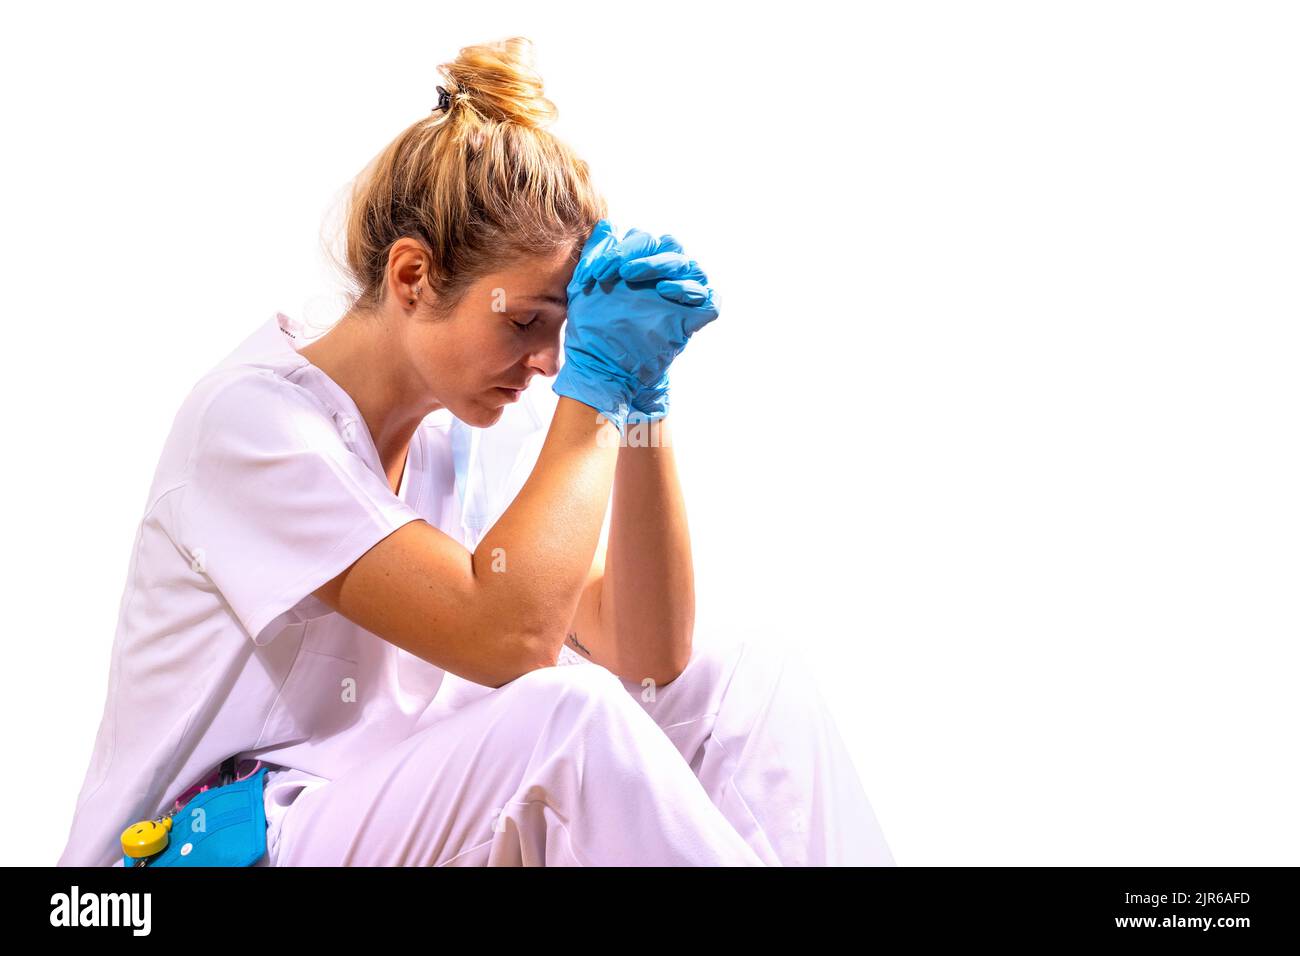 Medico girl defeated after a long day at the hospital. Stock Photo